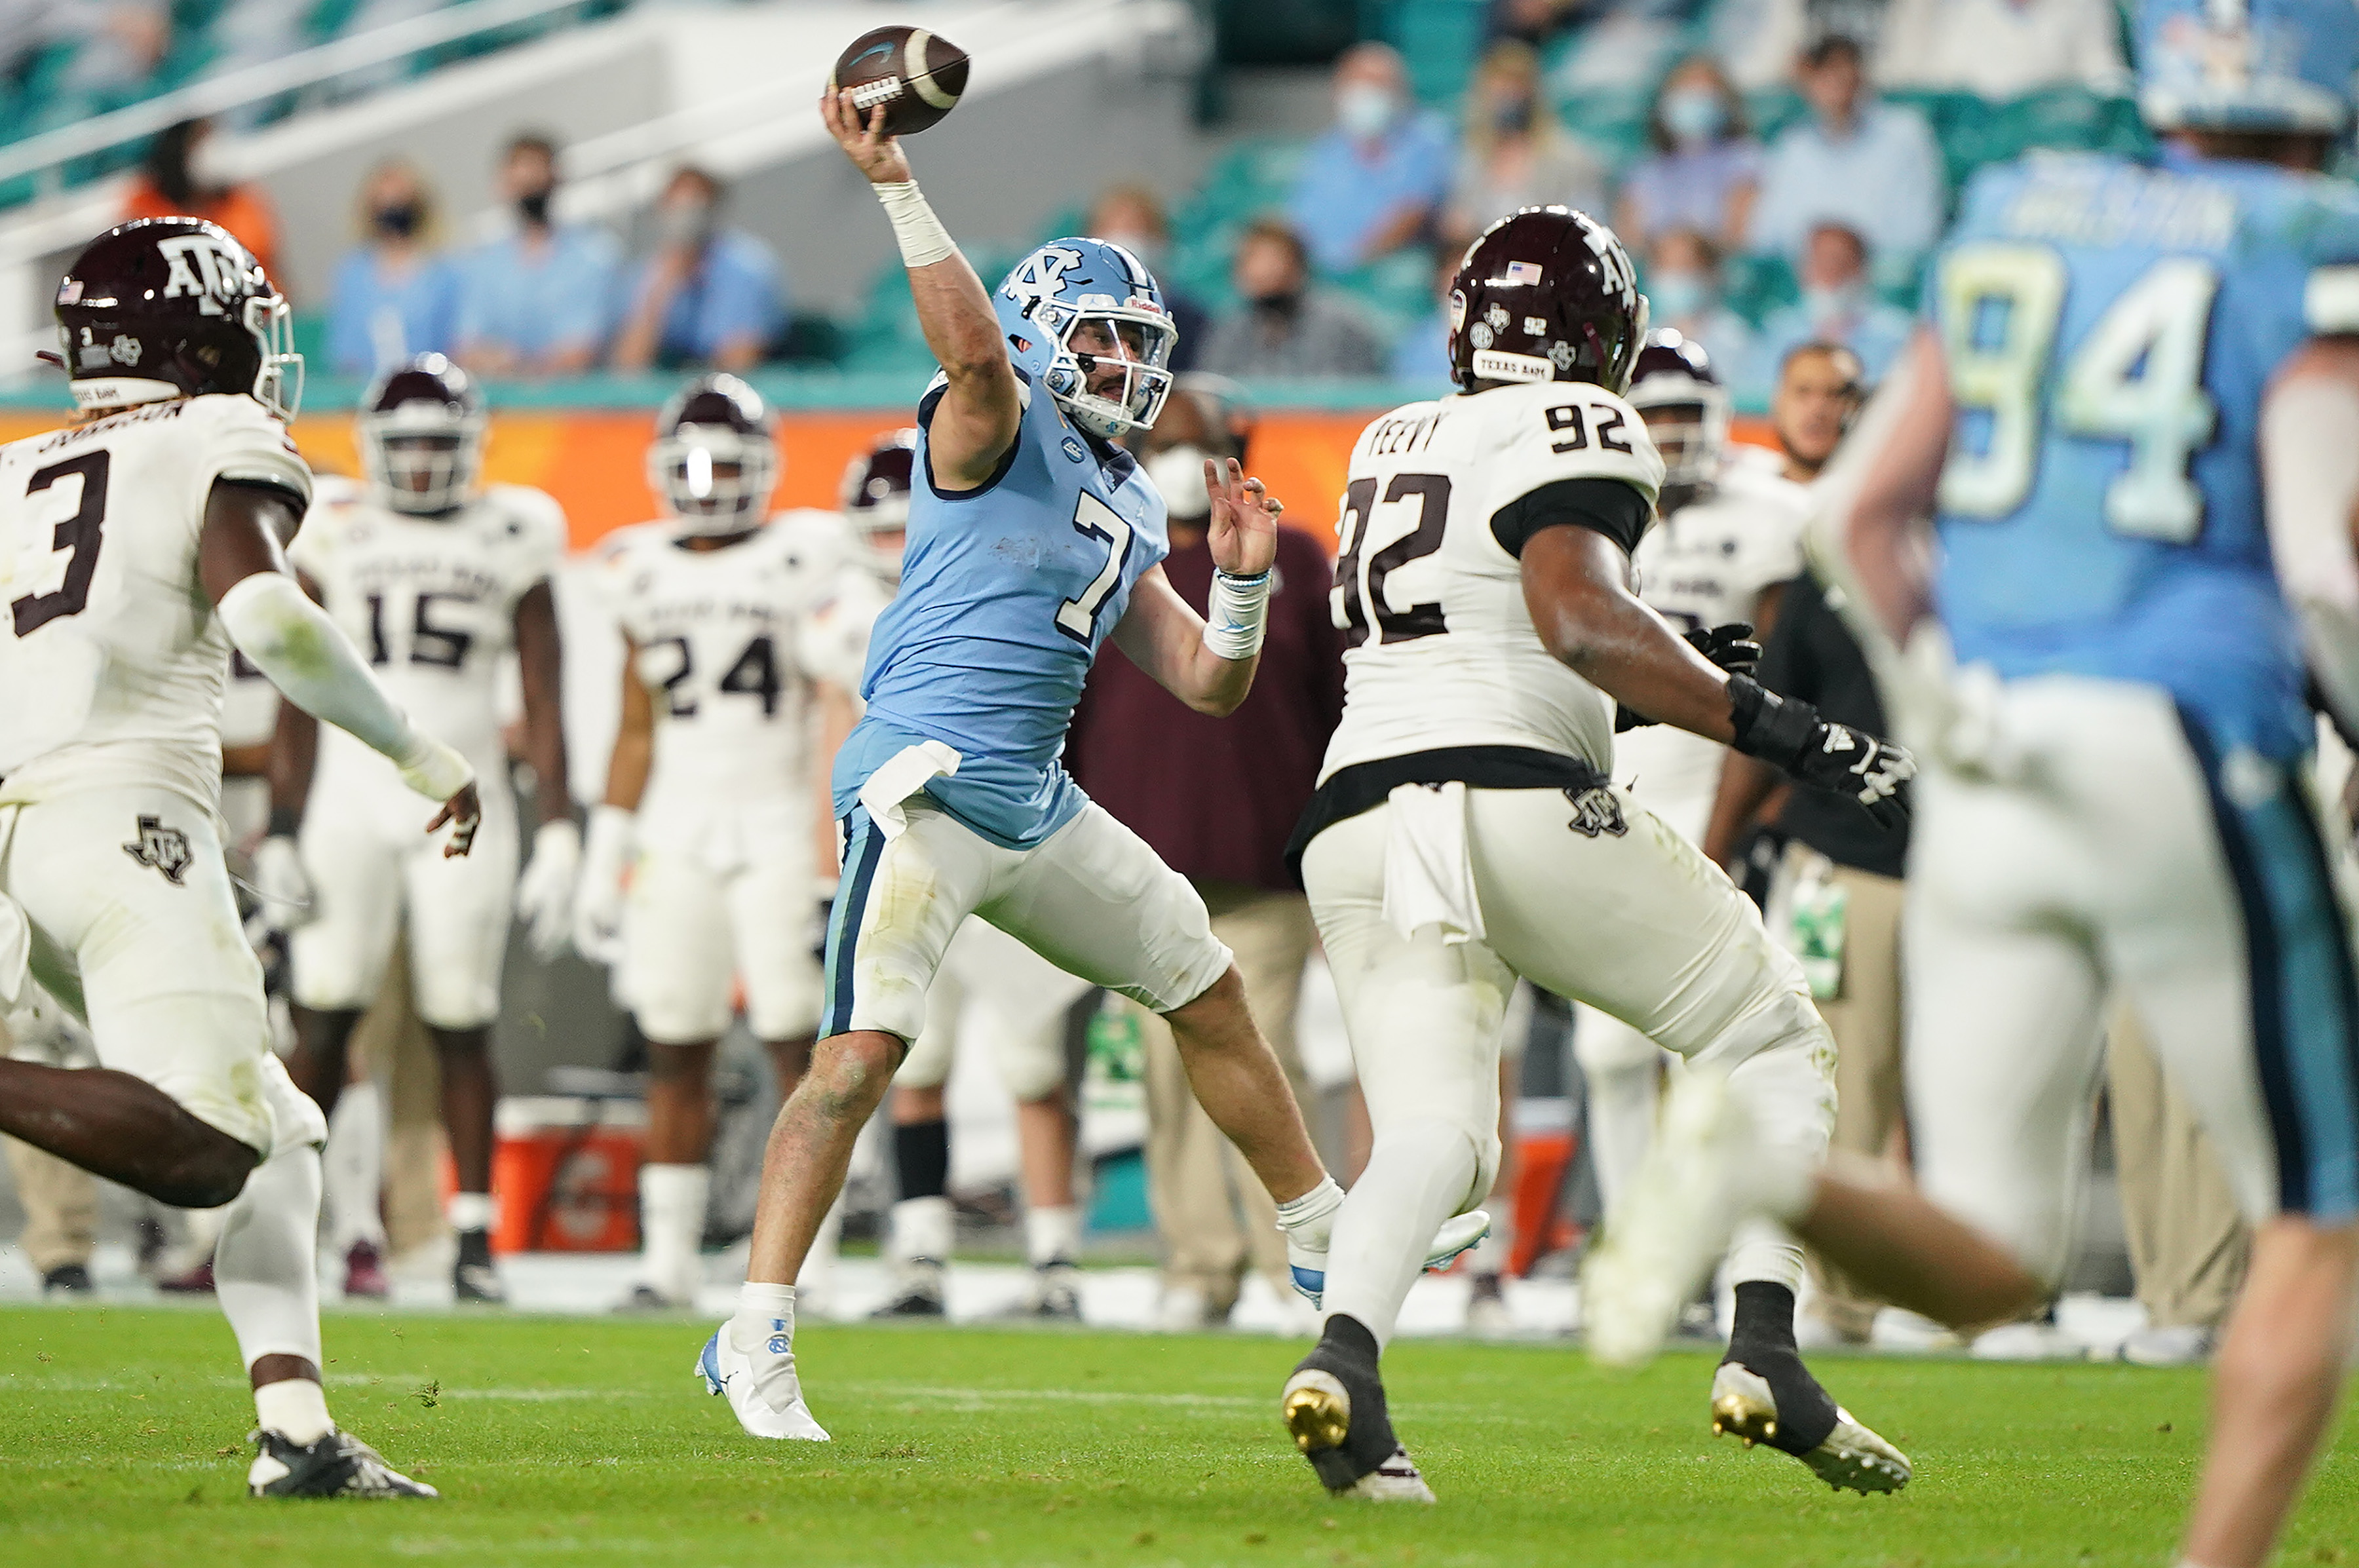 North Carolina Tar Heels quarterback Sam Howell (7) gets off a pass against the Texas A&M Aggies during the second half at Hard Rock Stadium.